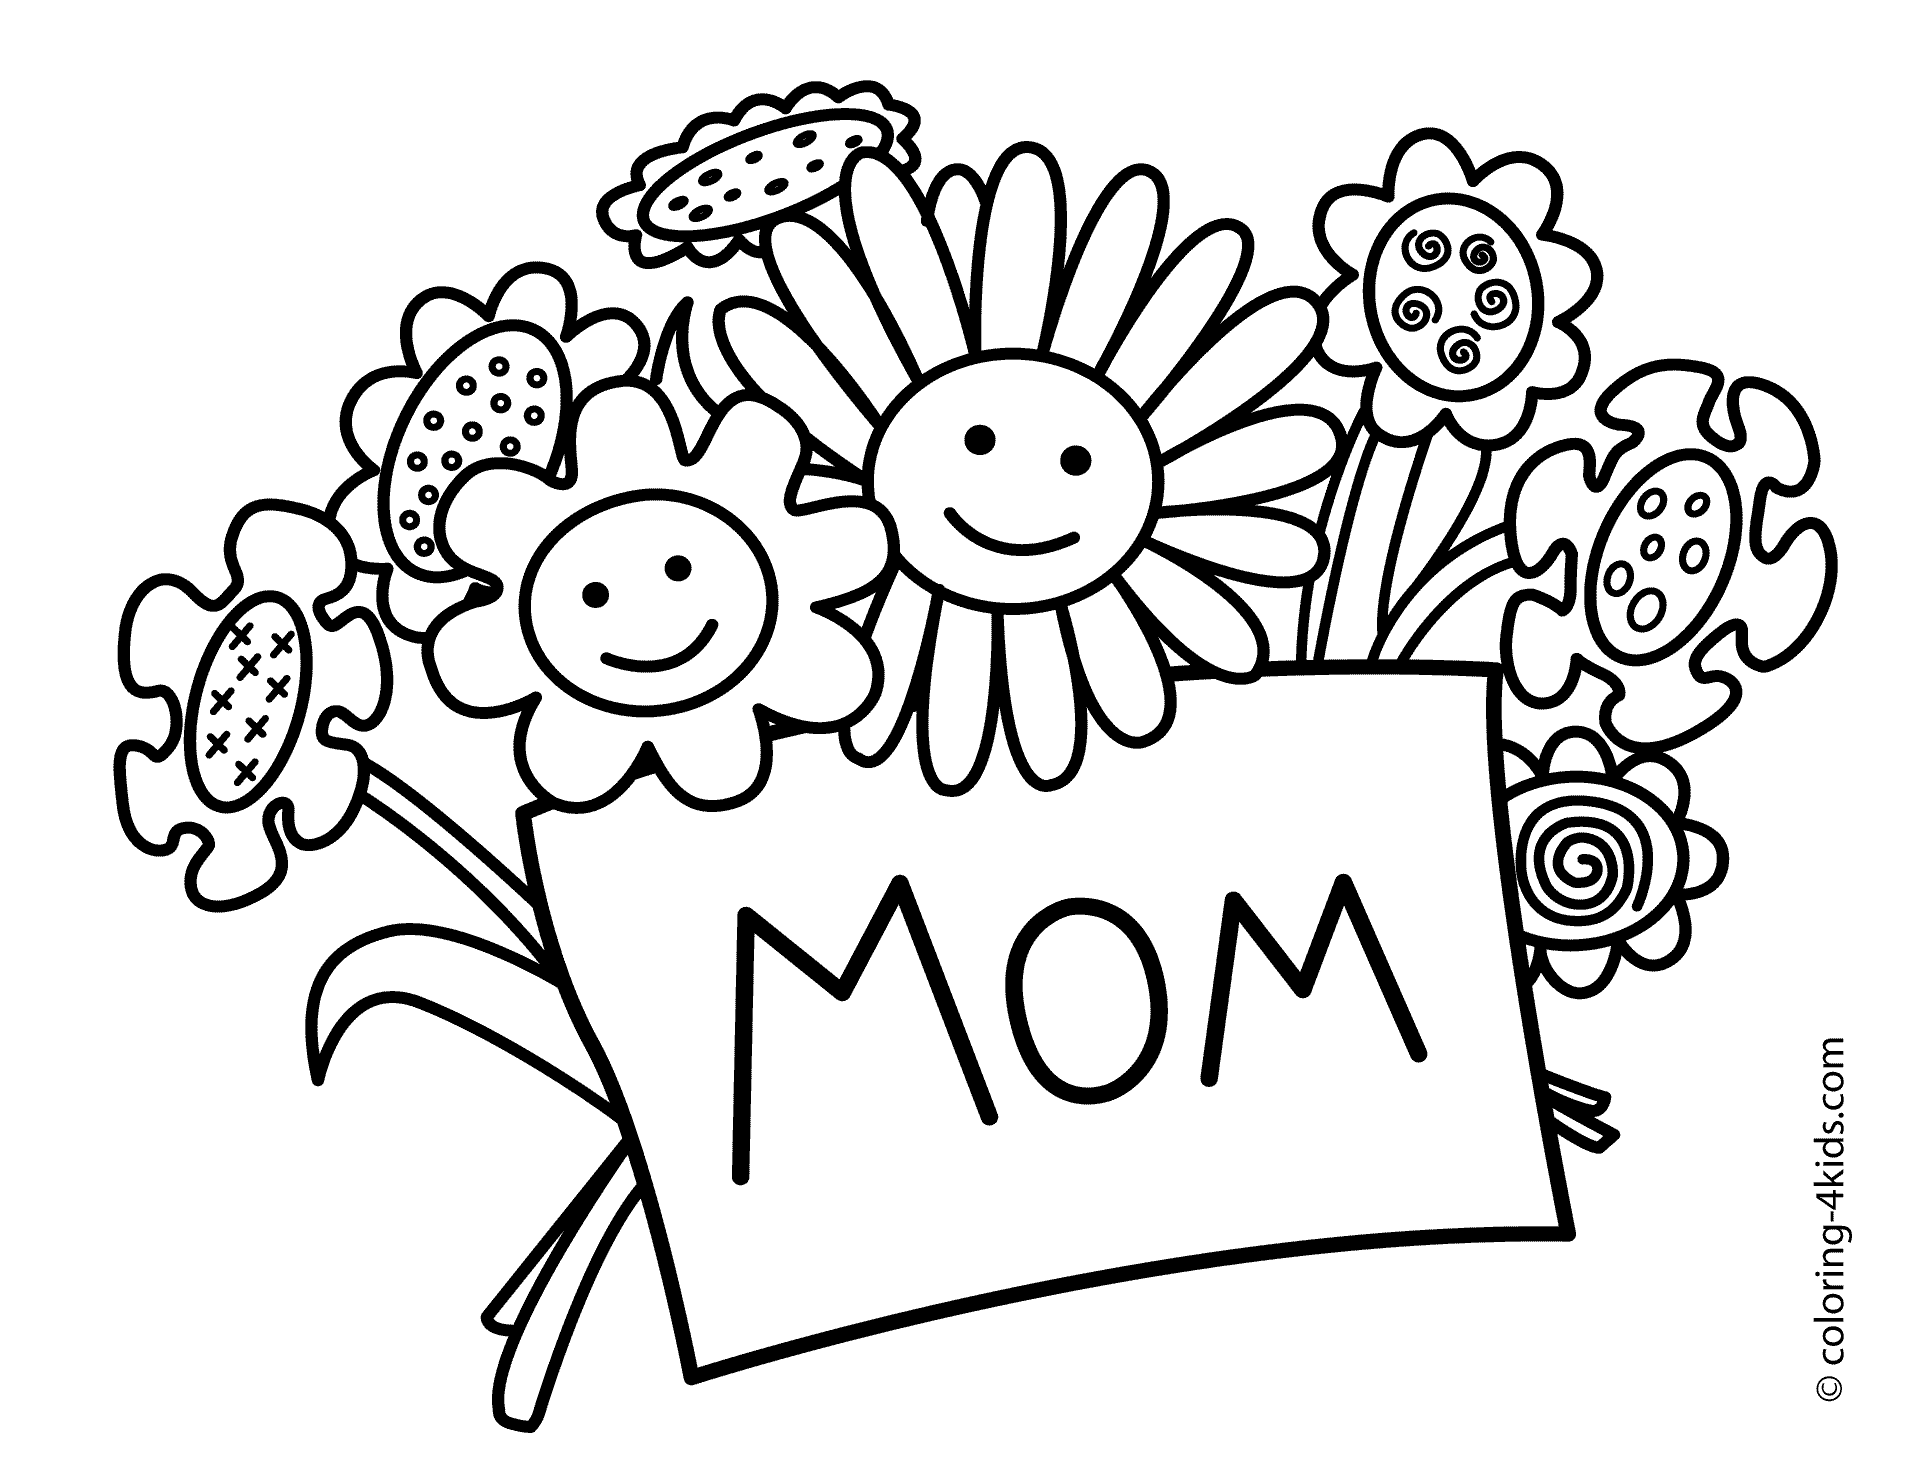 Happy Mom's Day Coloring Page Free Printable Coloring Pages for Kids